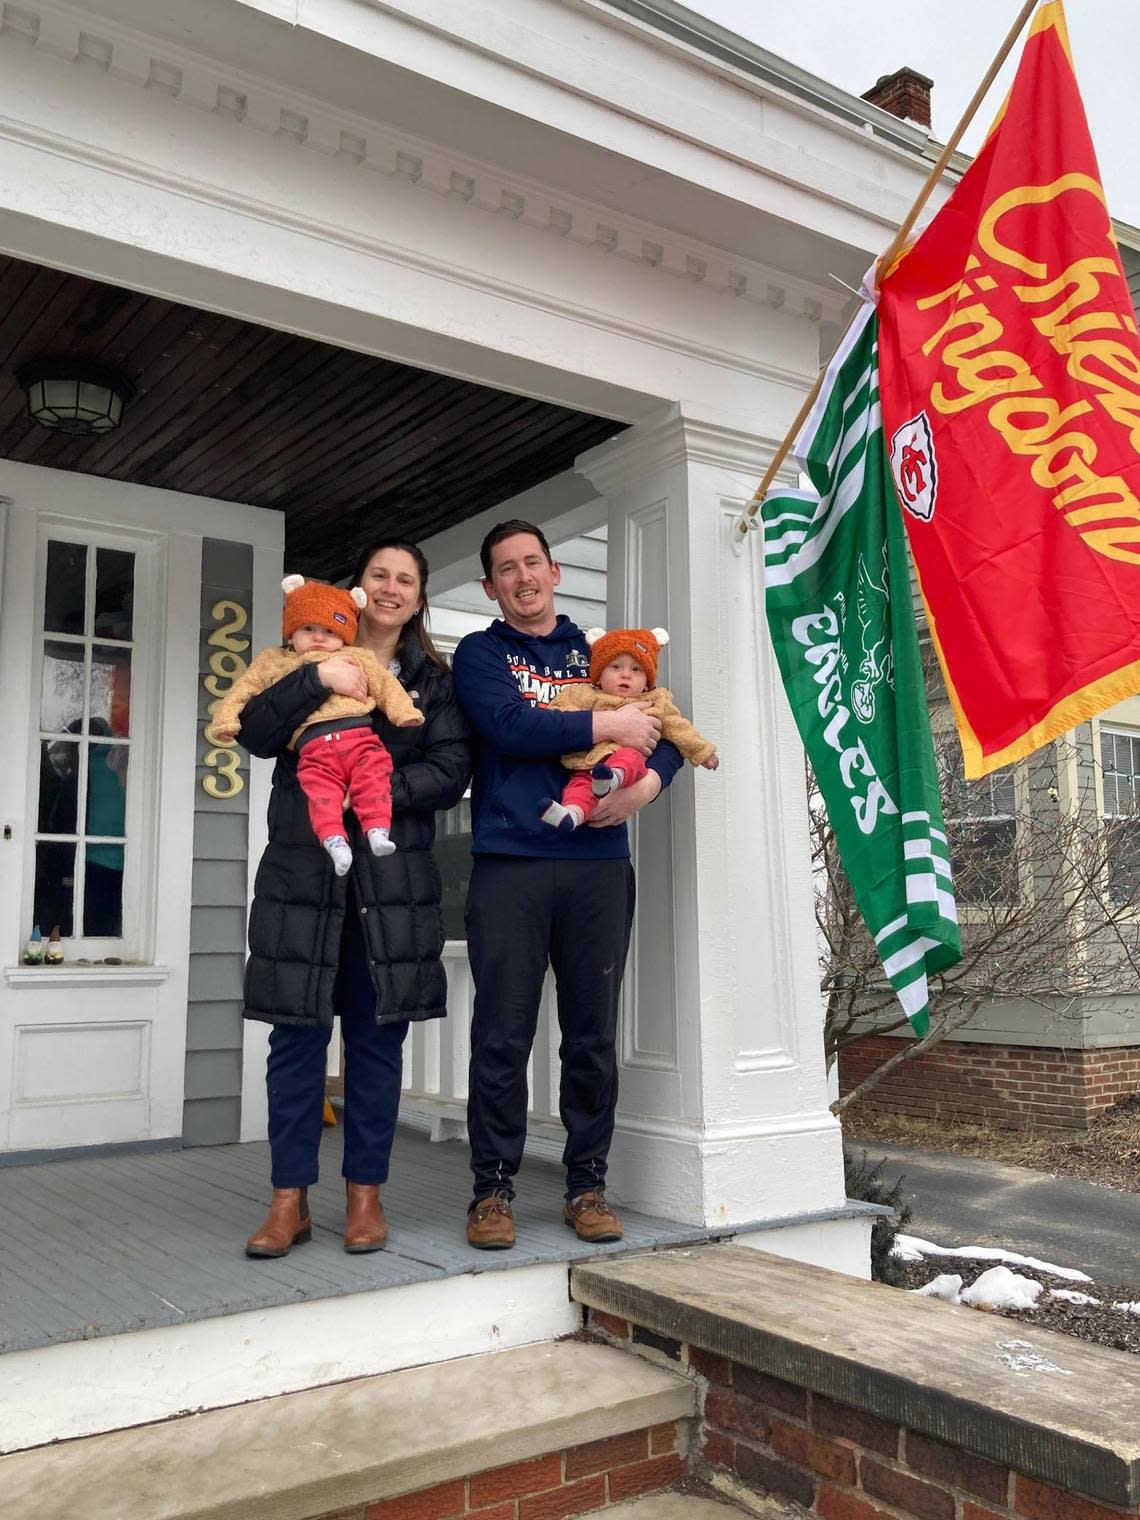 In a show of town spirit, Chiefs and Eagles flags hang from the boyhood home of Travis and Jason Kelce on Coleridge Road in Cleveland Heights, Ohio. Megan Ansbro and husband Levi Heacock, seen with twin sons Henry, left, and Hugo, moved there in August.